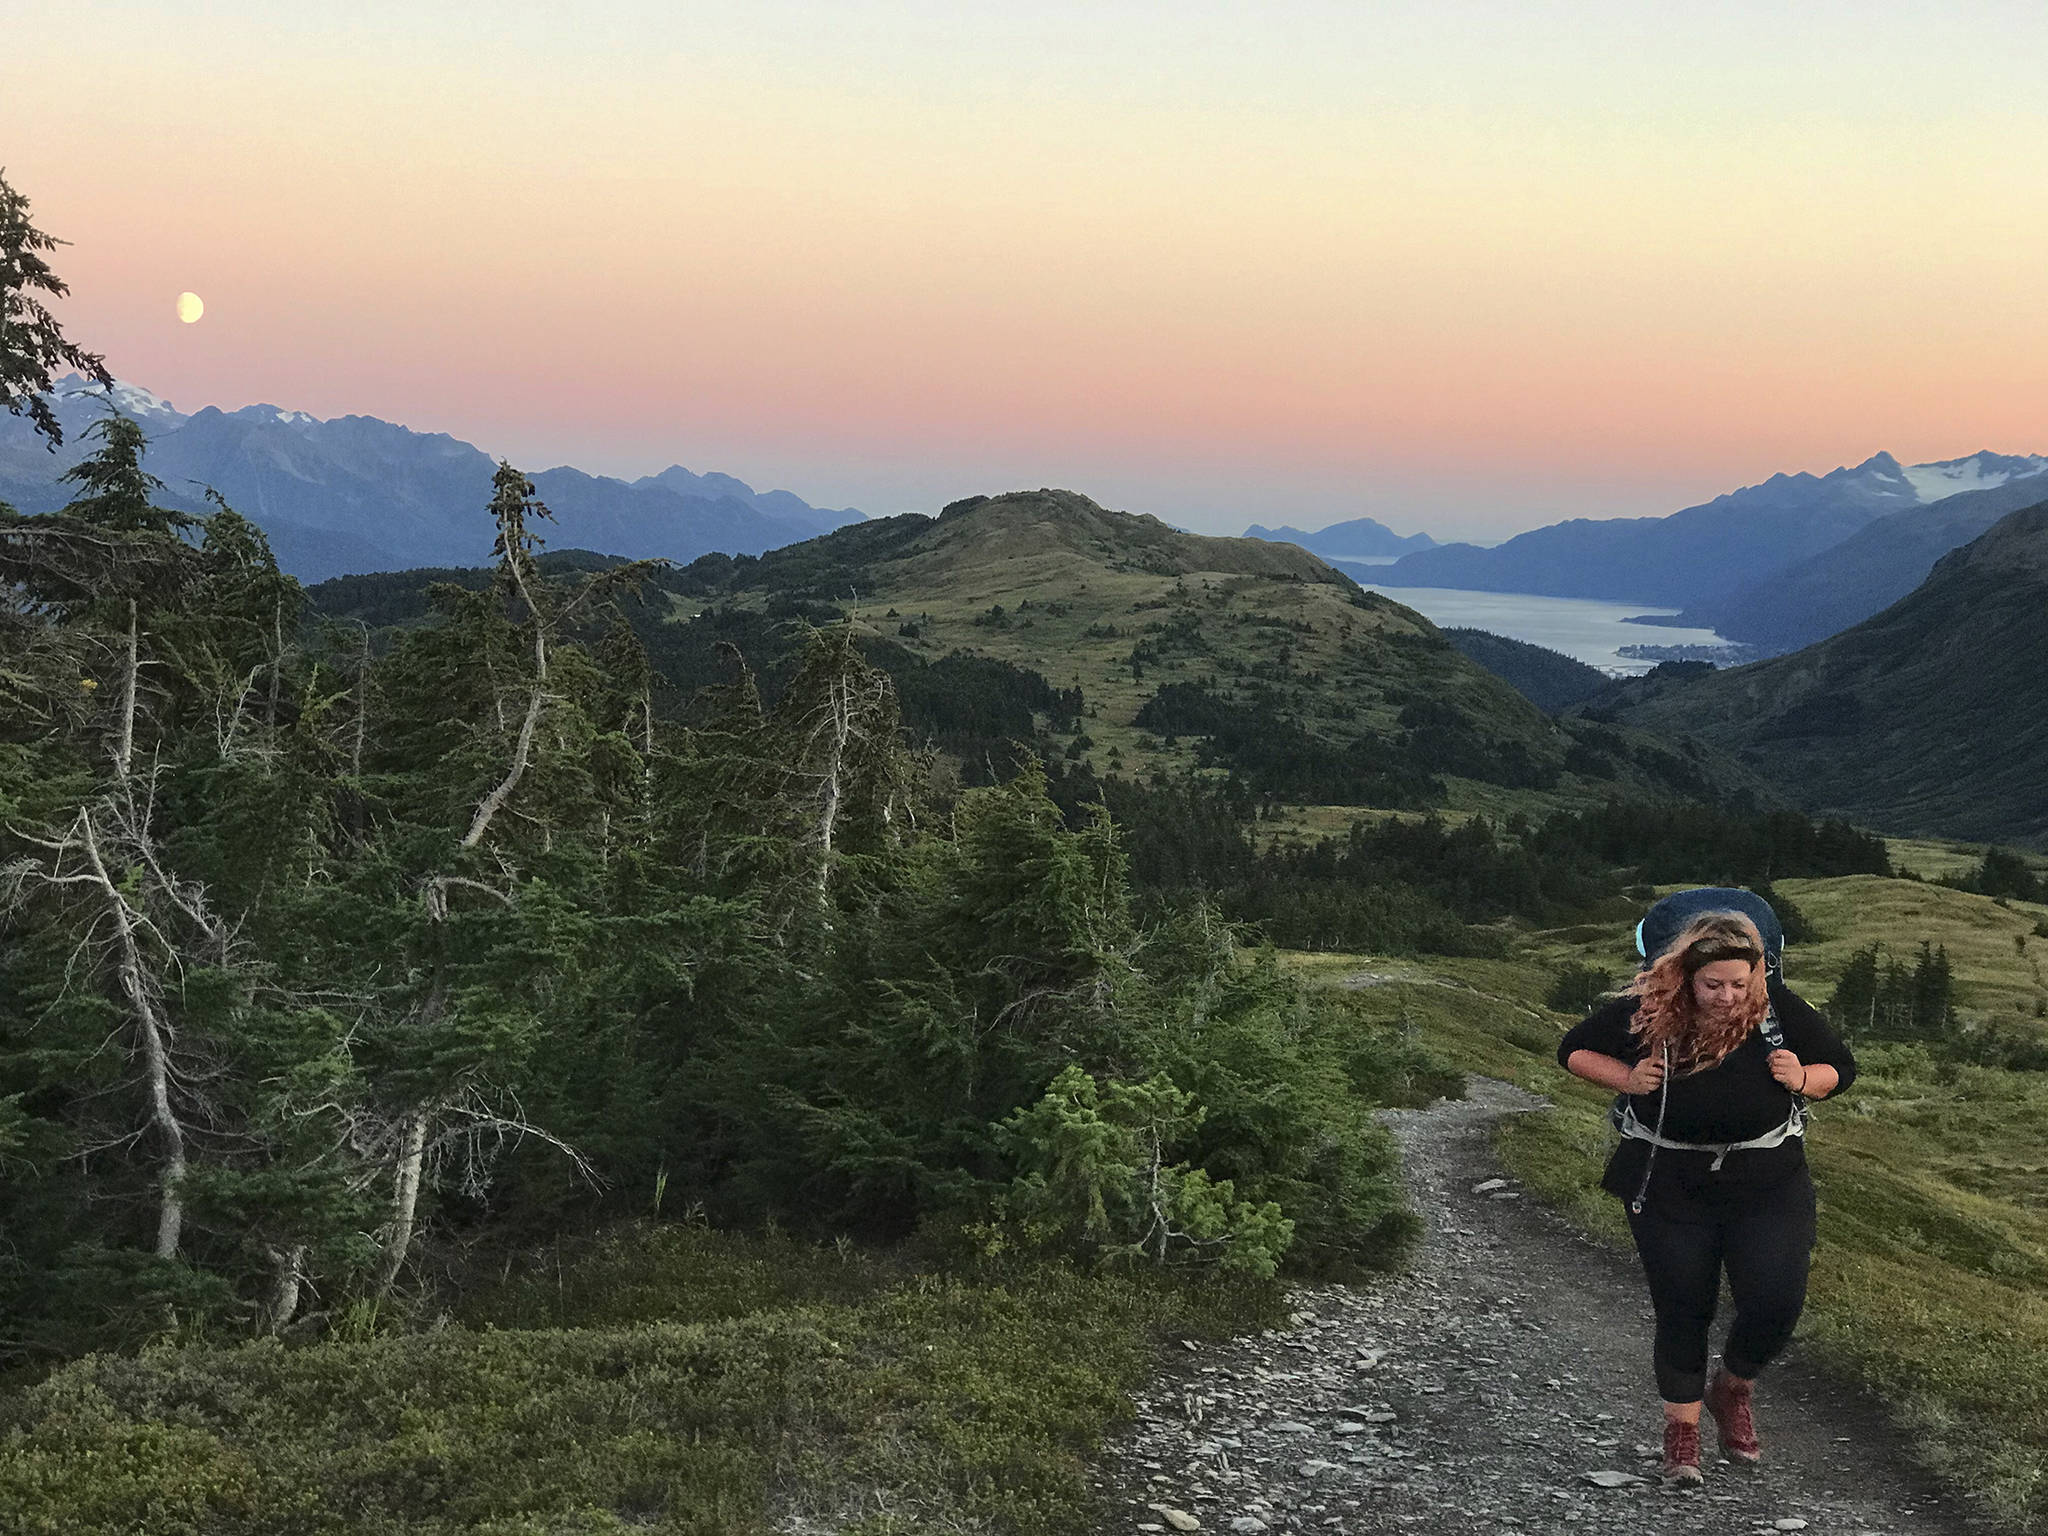 The author hikes up a ridge on the way to Lost Lake on Aug. 28, 2020 near Seward, Alaska. (Photo by Lauren Jerew)